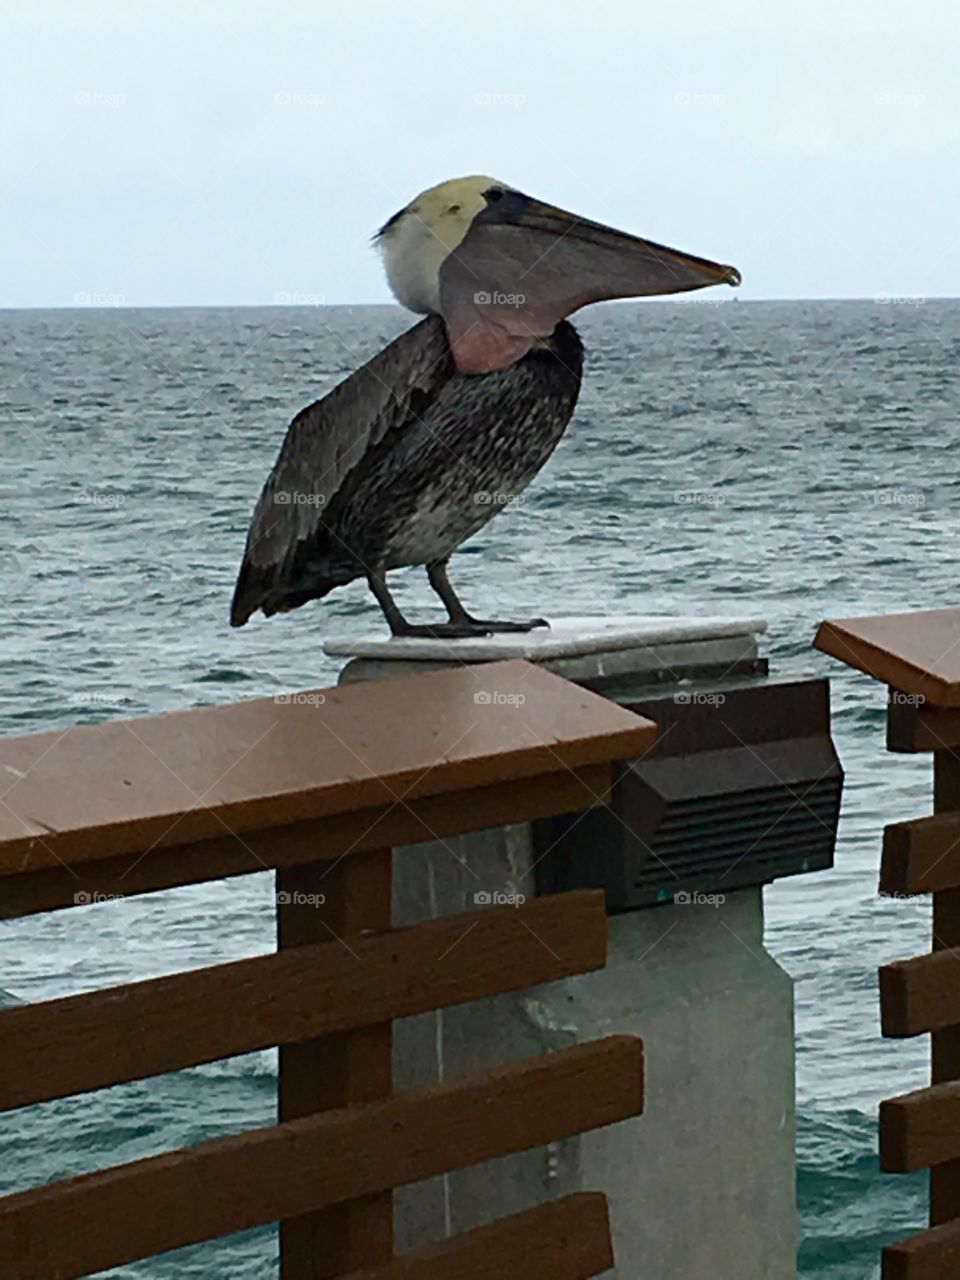 Pelican that ate a mackerel that bit through his pouch and escaped, leaving a hole.
